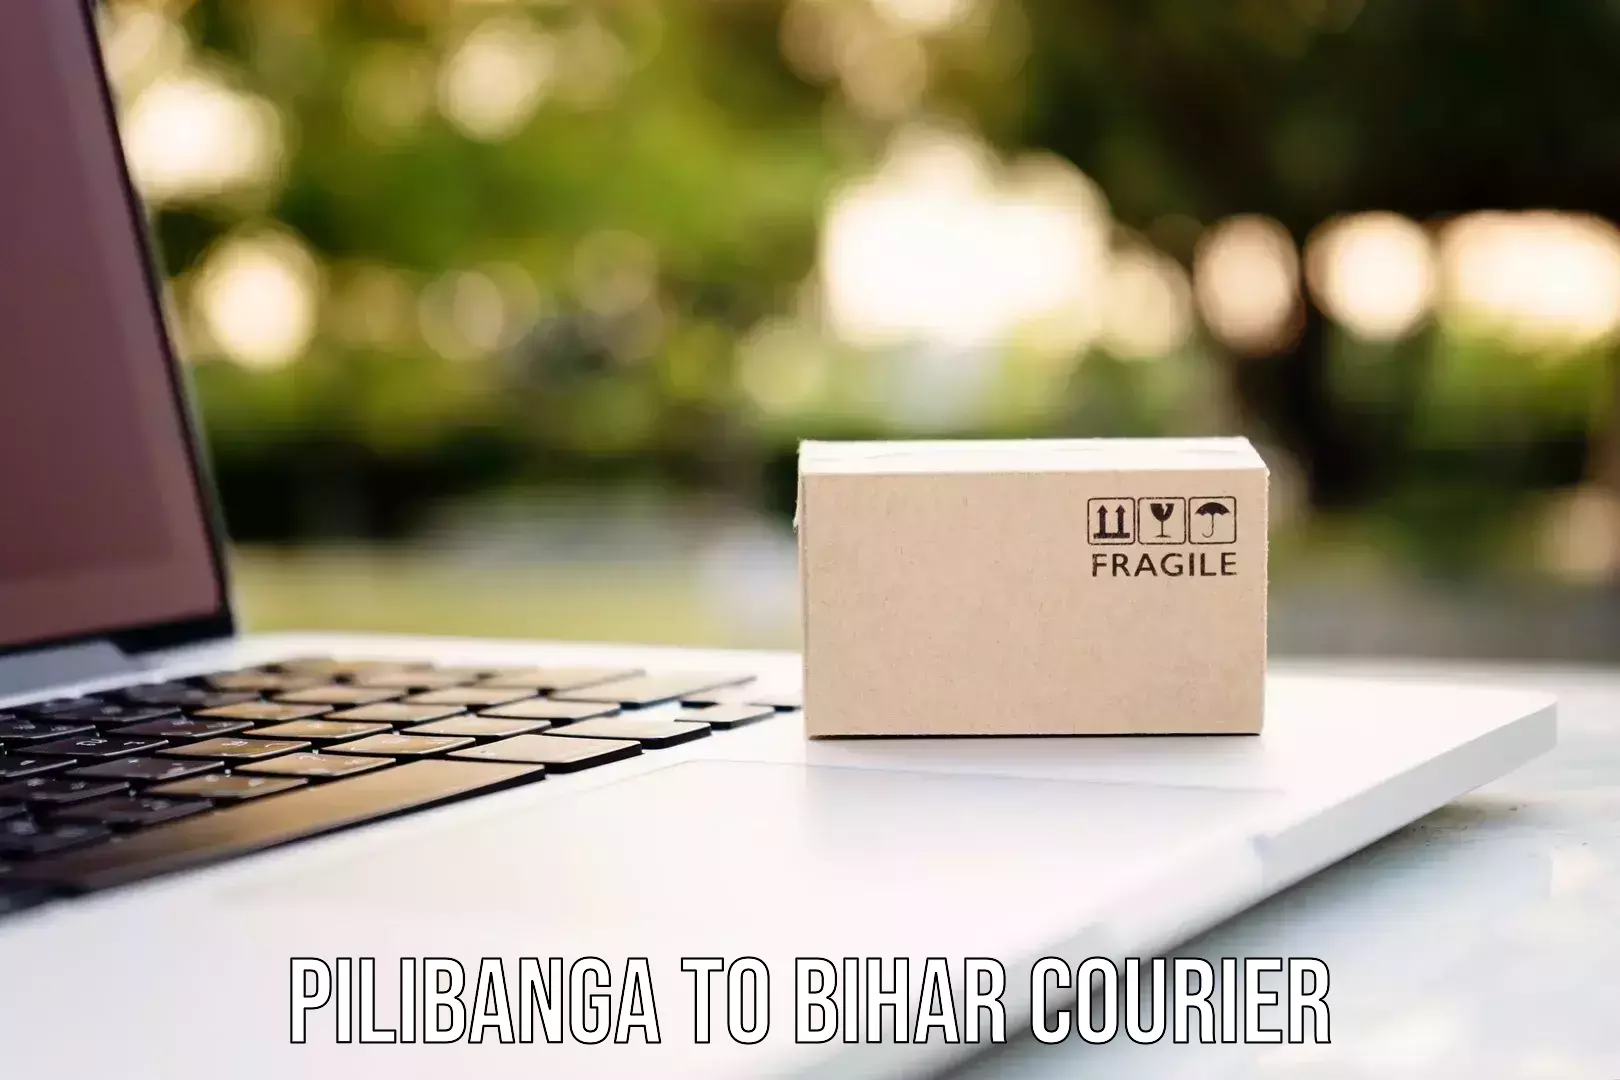 Courier service comparison in Pilibanga to Biraul